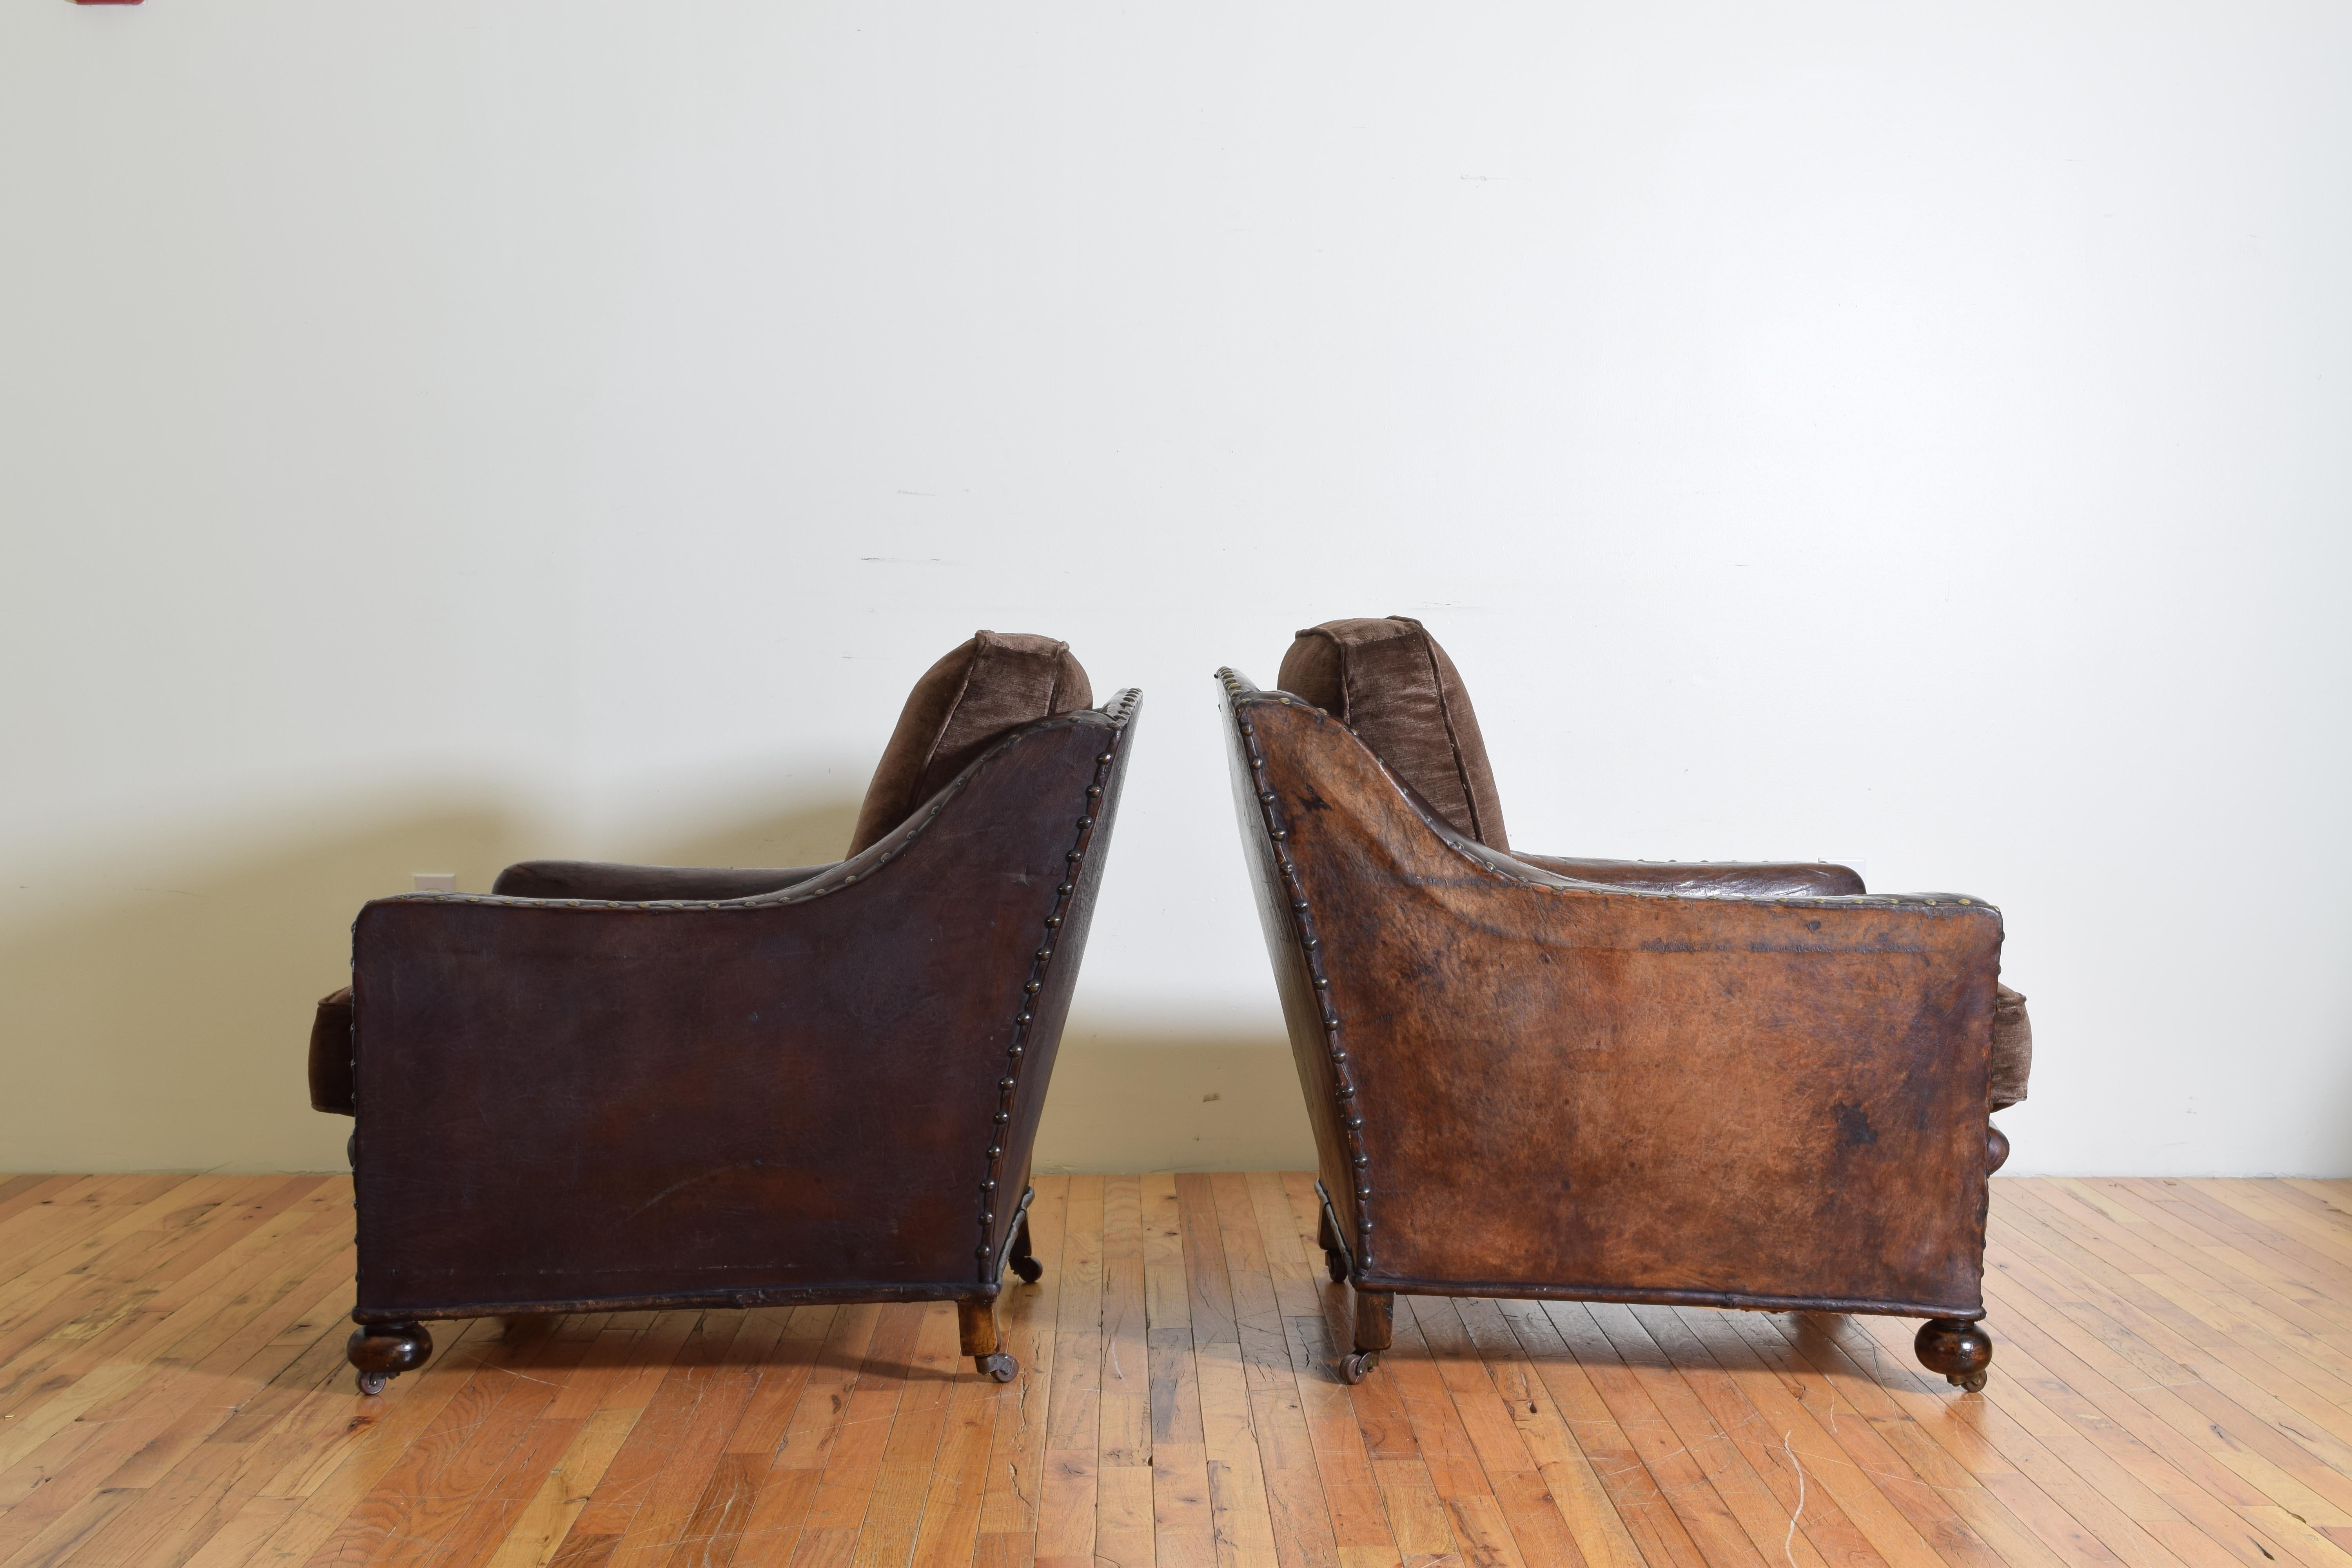 Pair of French Art Deco Period Leather and Velvet Upholstered Club Chairs 1